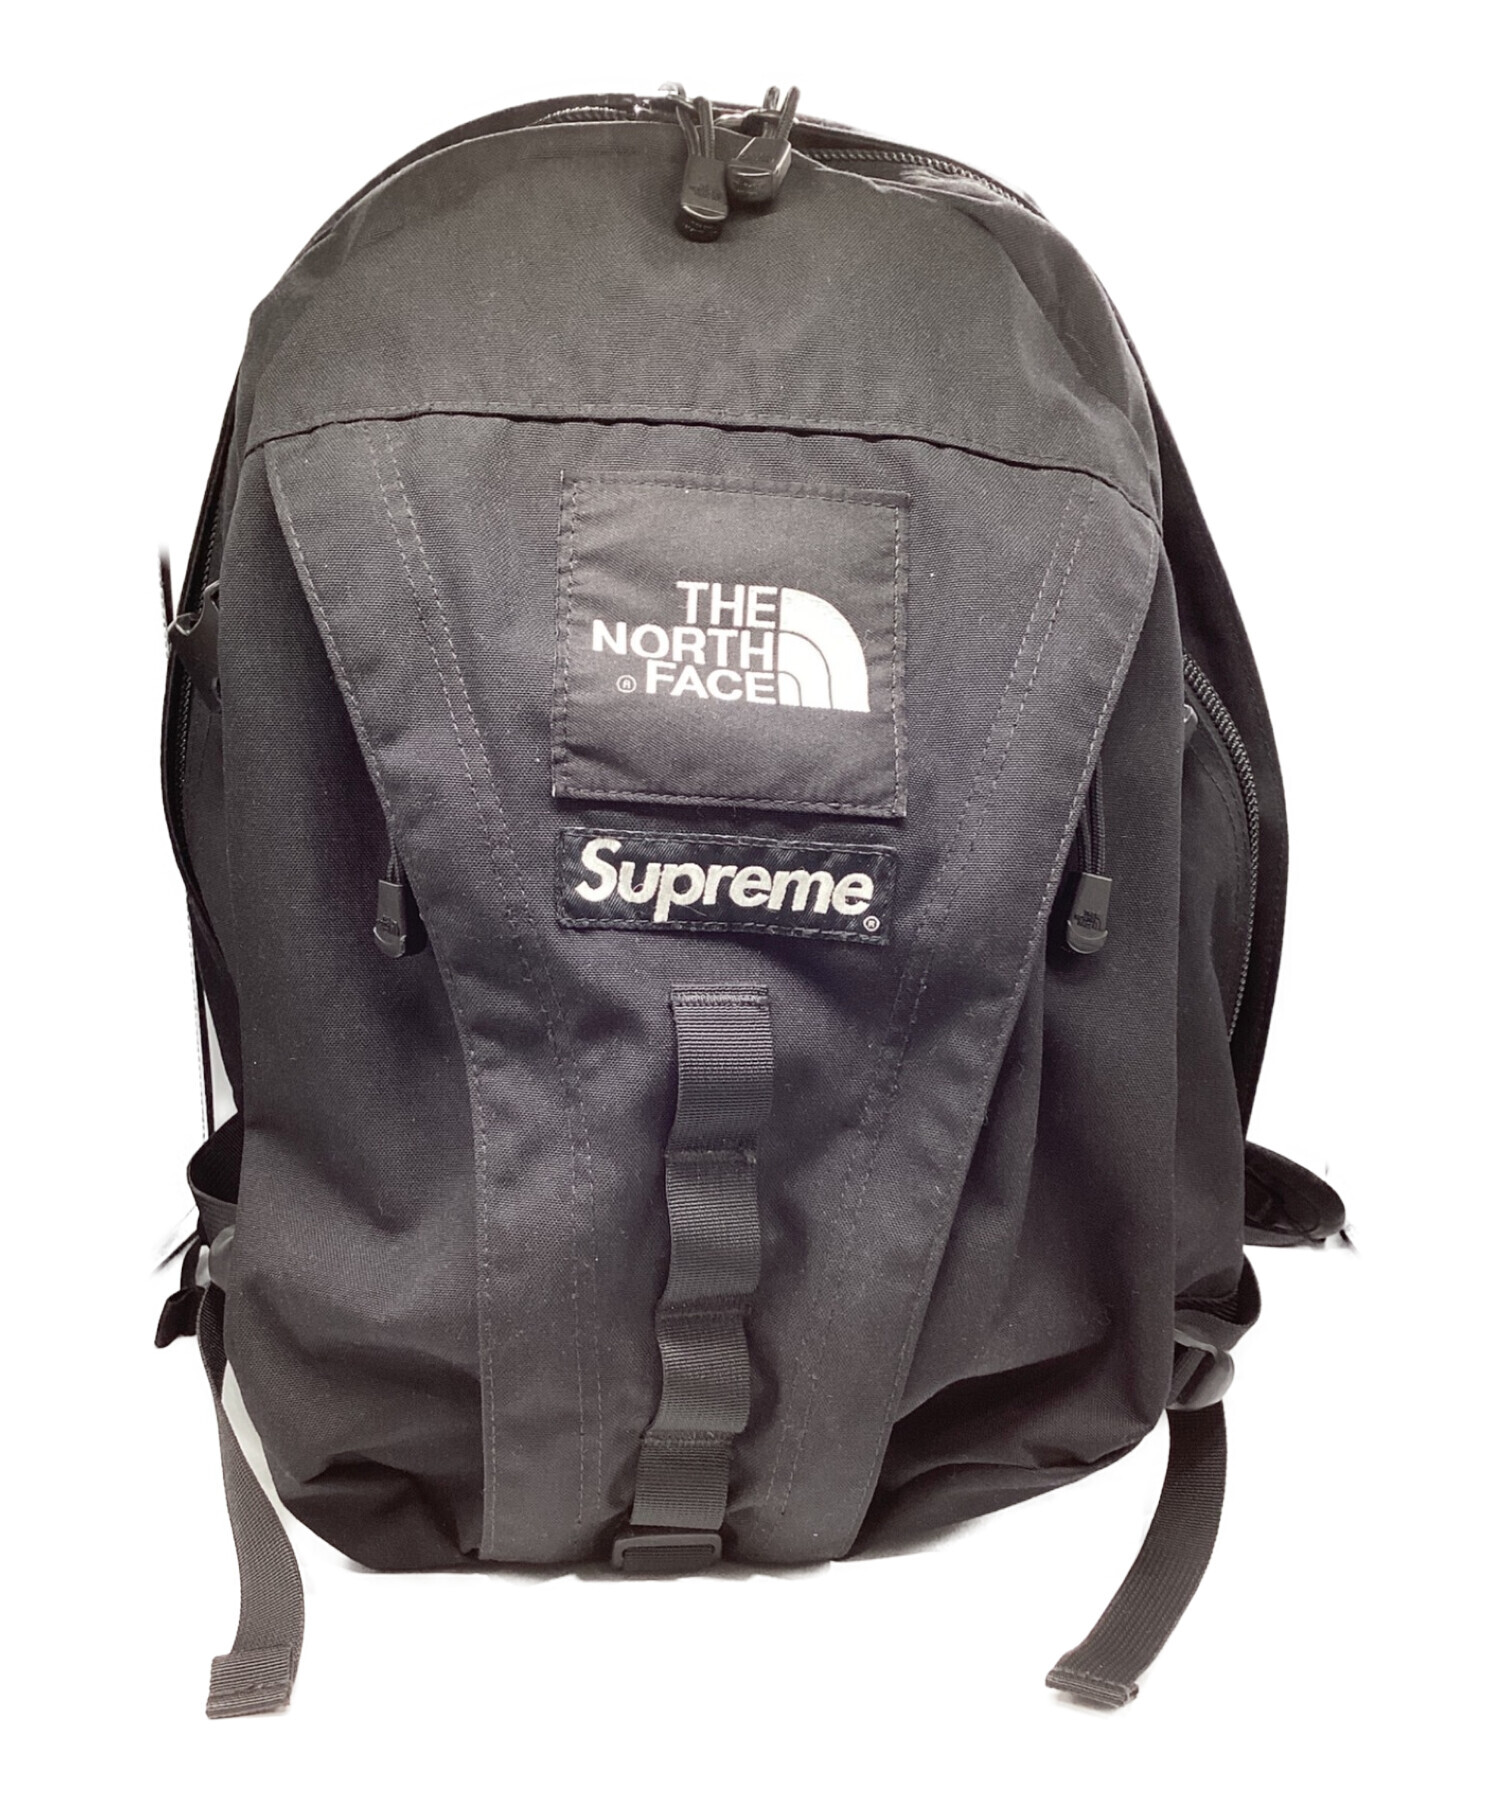 Supreme THE NORTH FACE 18AW backpack